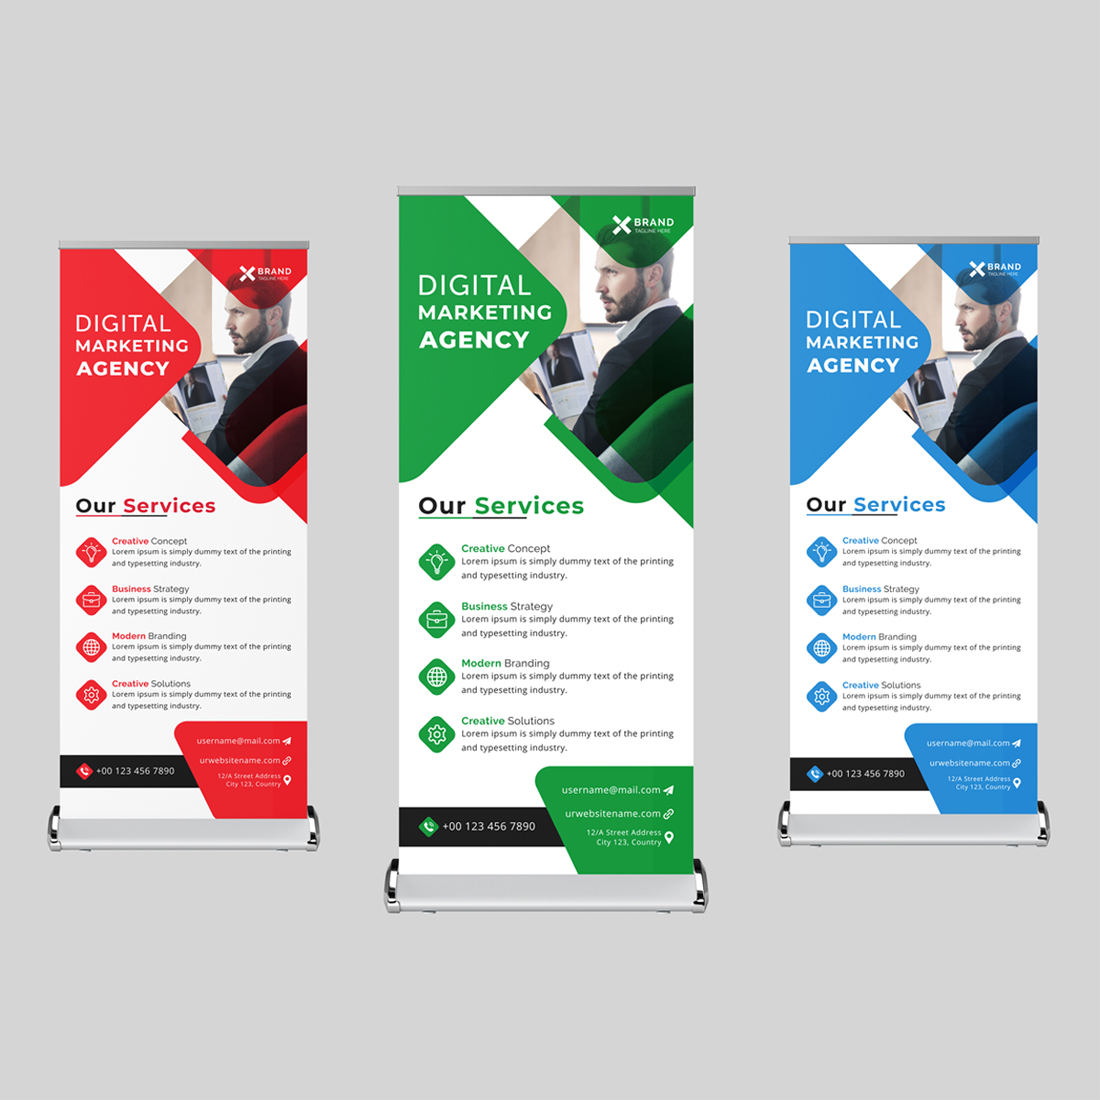 Digital Marketing Agency Roll Up Banner Design Template cover image.